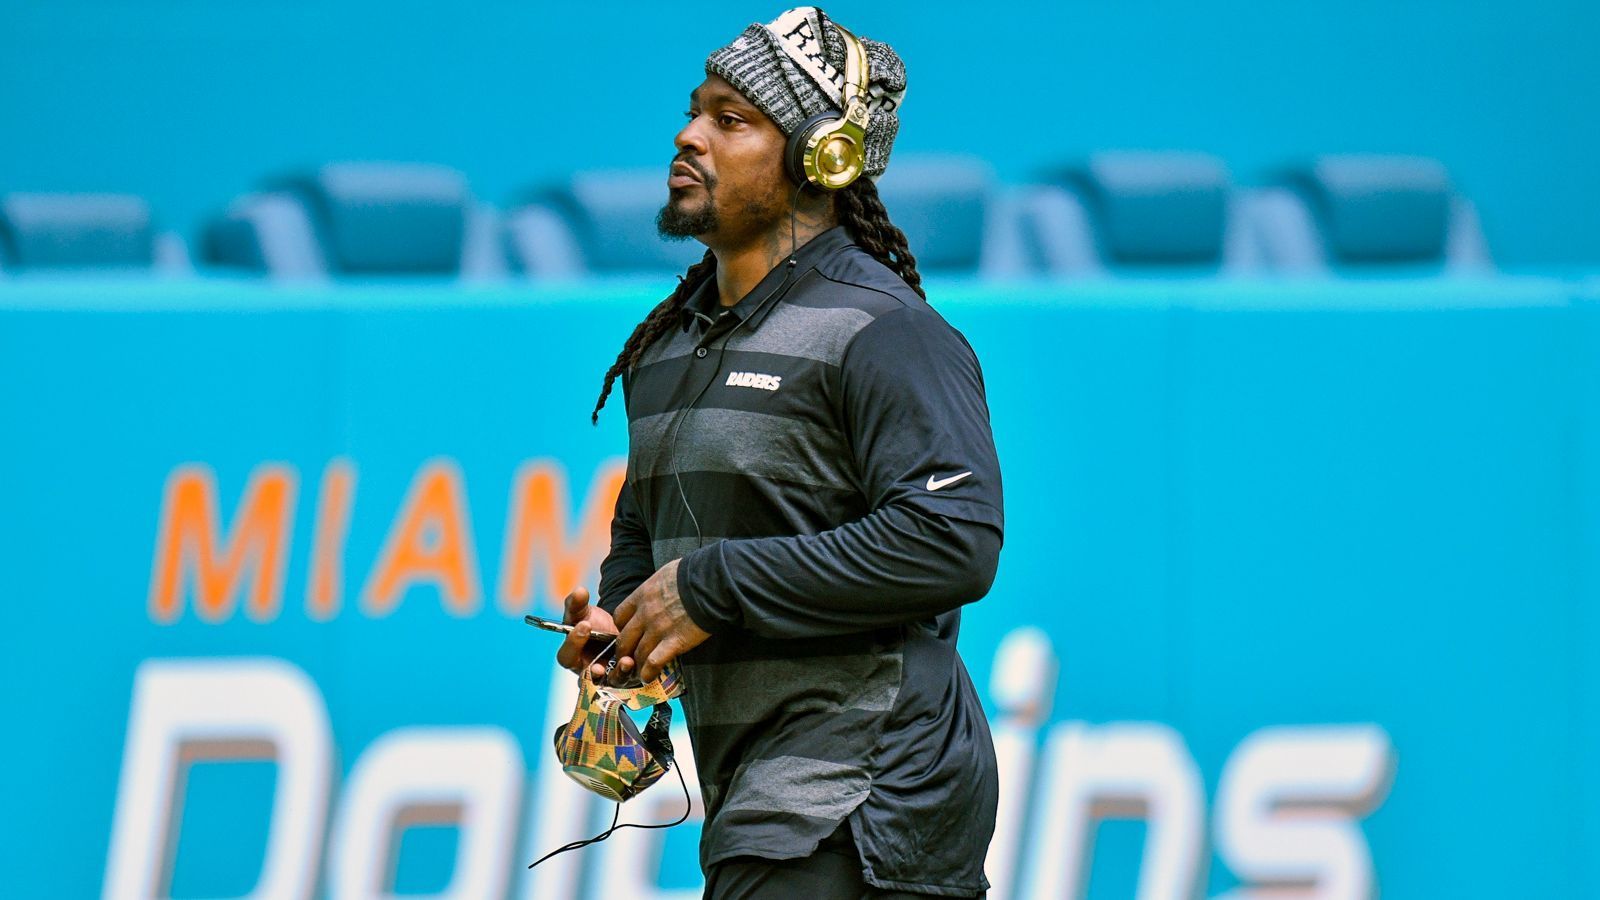 
                <strong>Oakland Raiders: Marshawn Lynch</strong><br>
                Position: Running Back
              